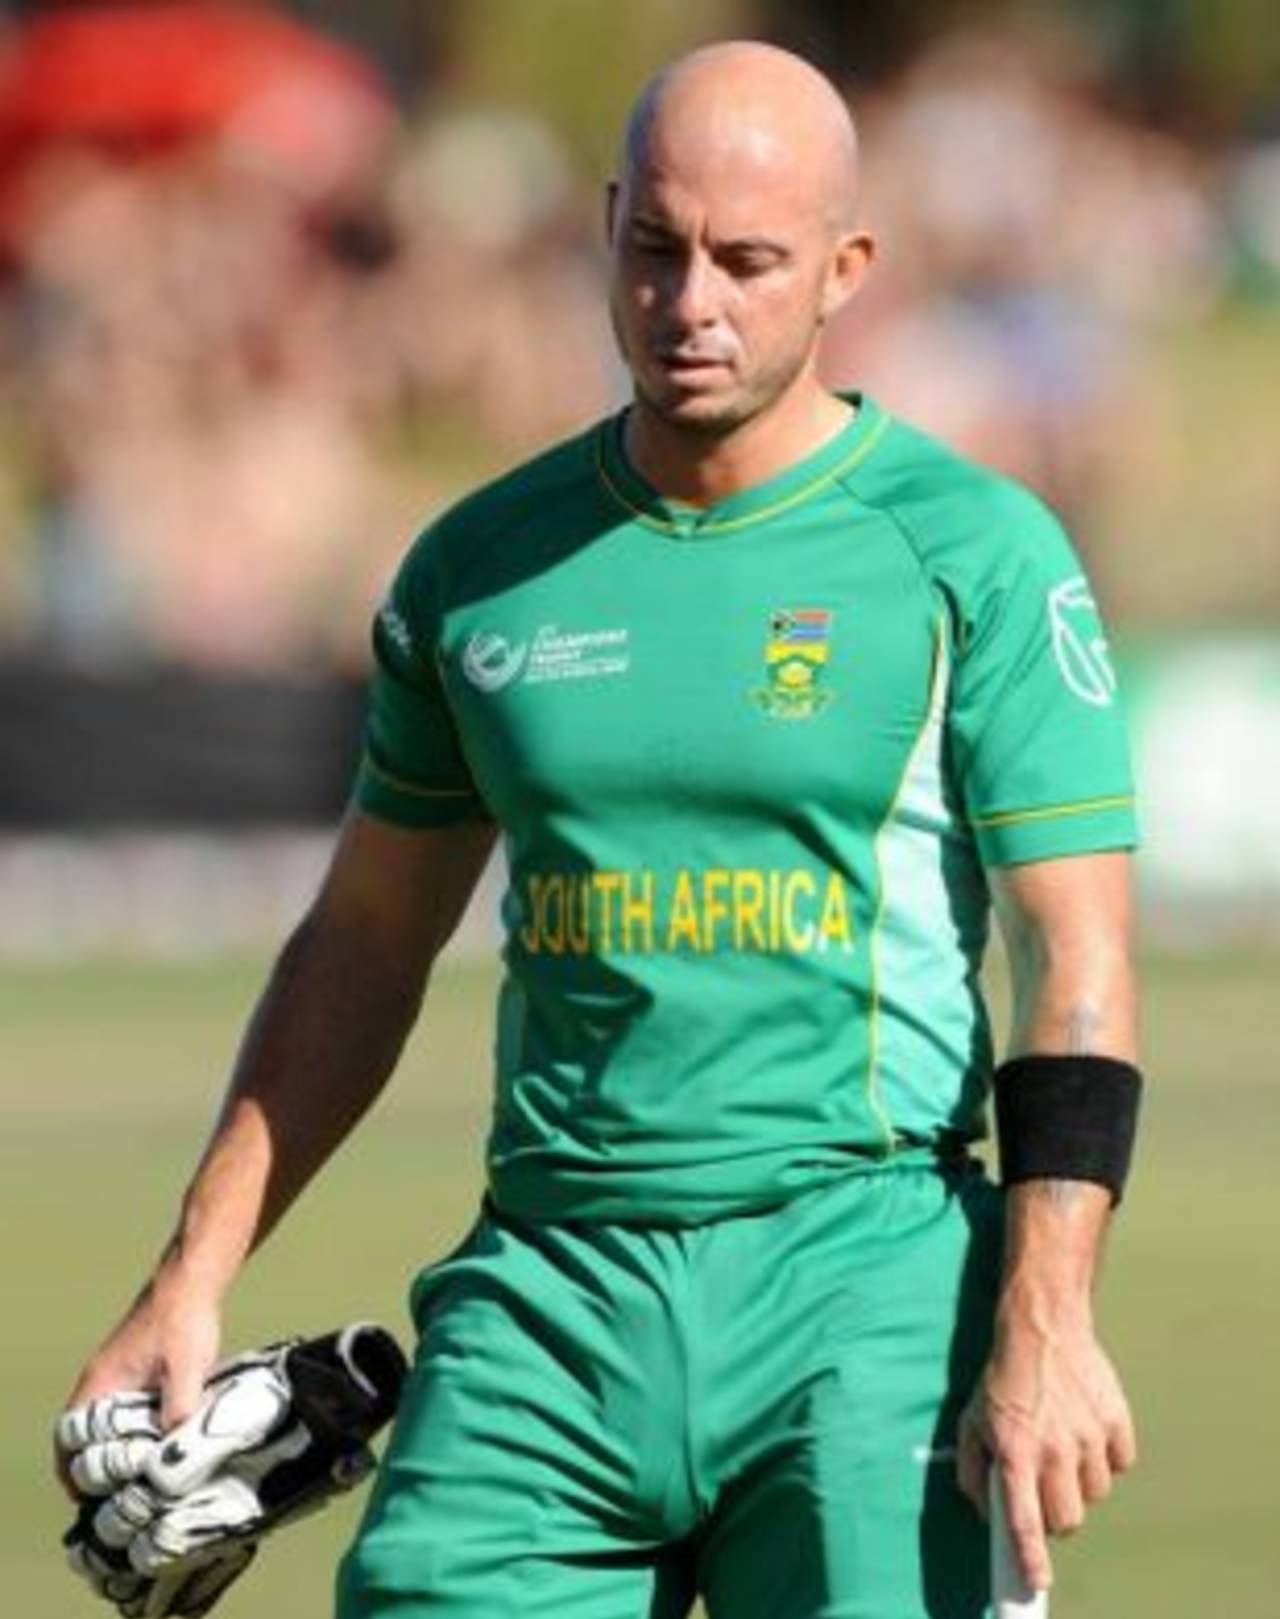 Though his contract was terminated, Herschelle Gibbs "remains eligible for selection," according to Cricket South Africa&nbsp;&nbsp;&bull;&nbsp;&nbsp;Getty Images